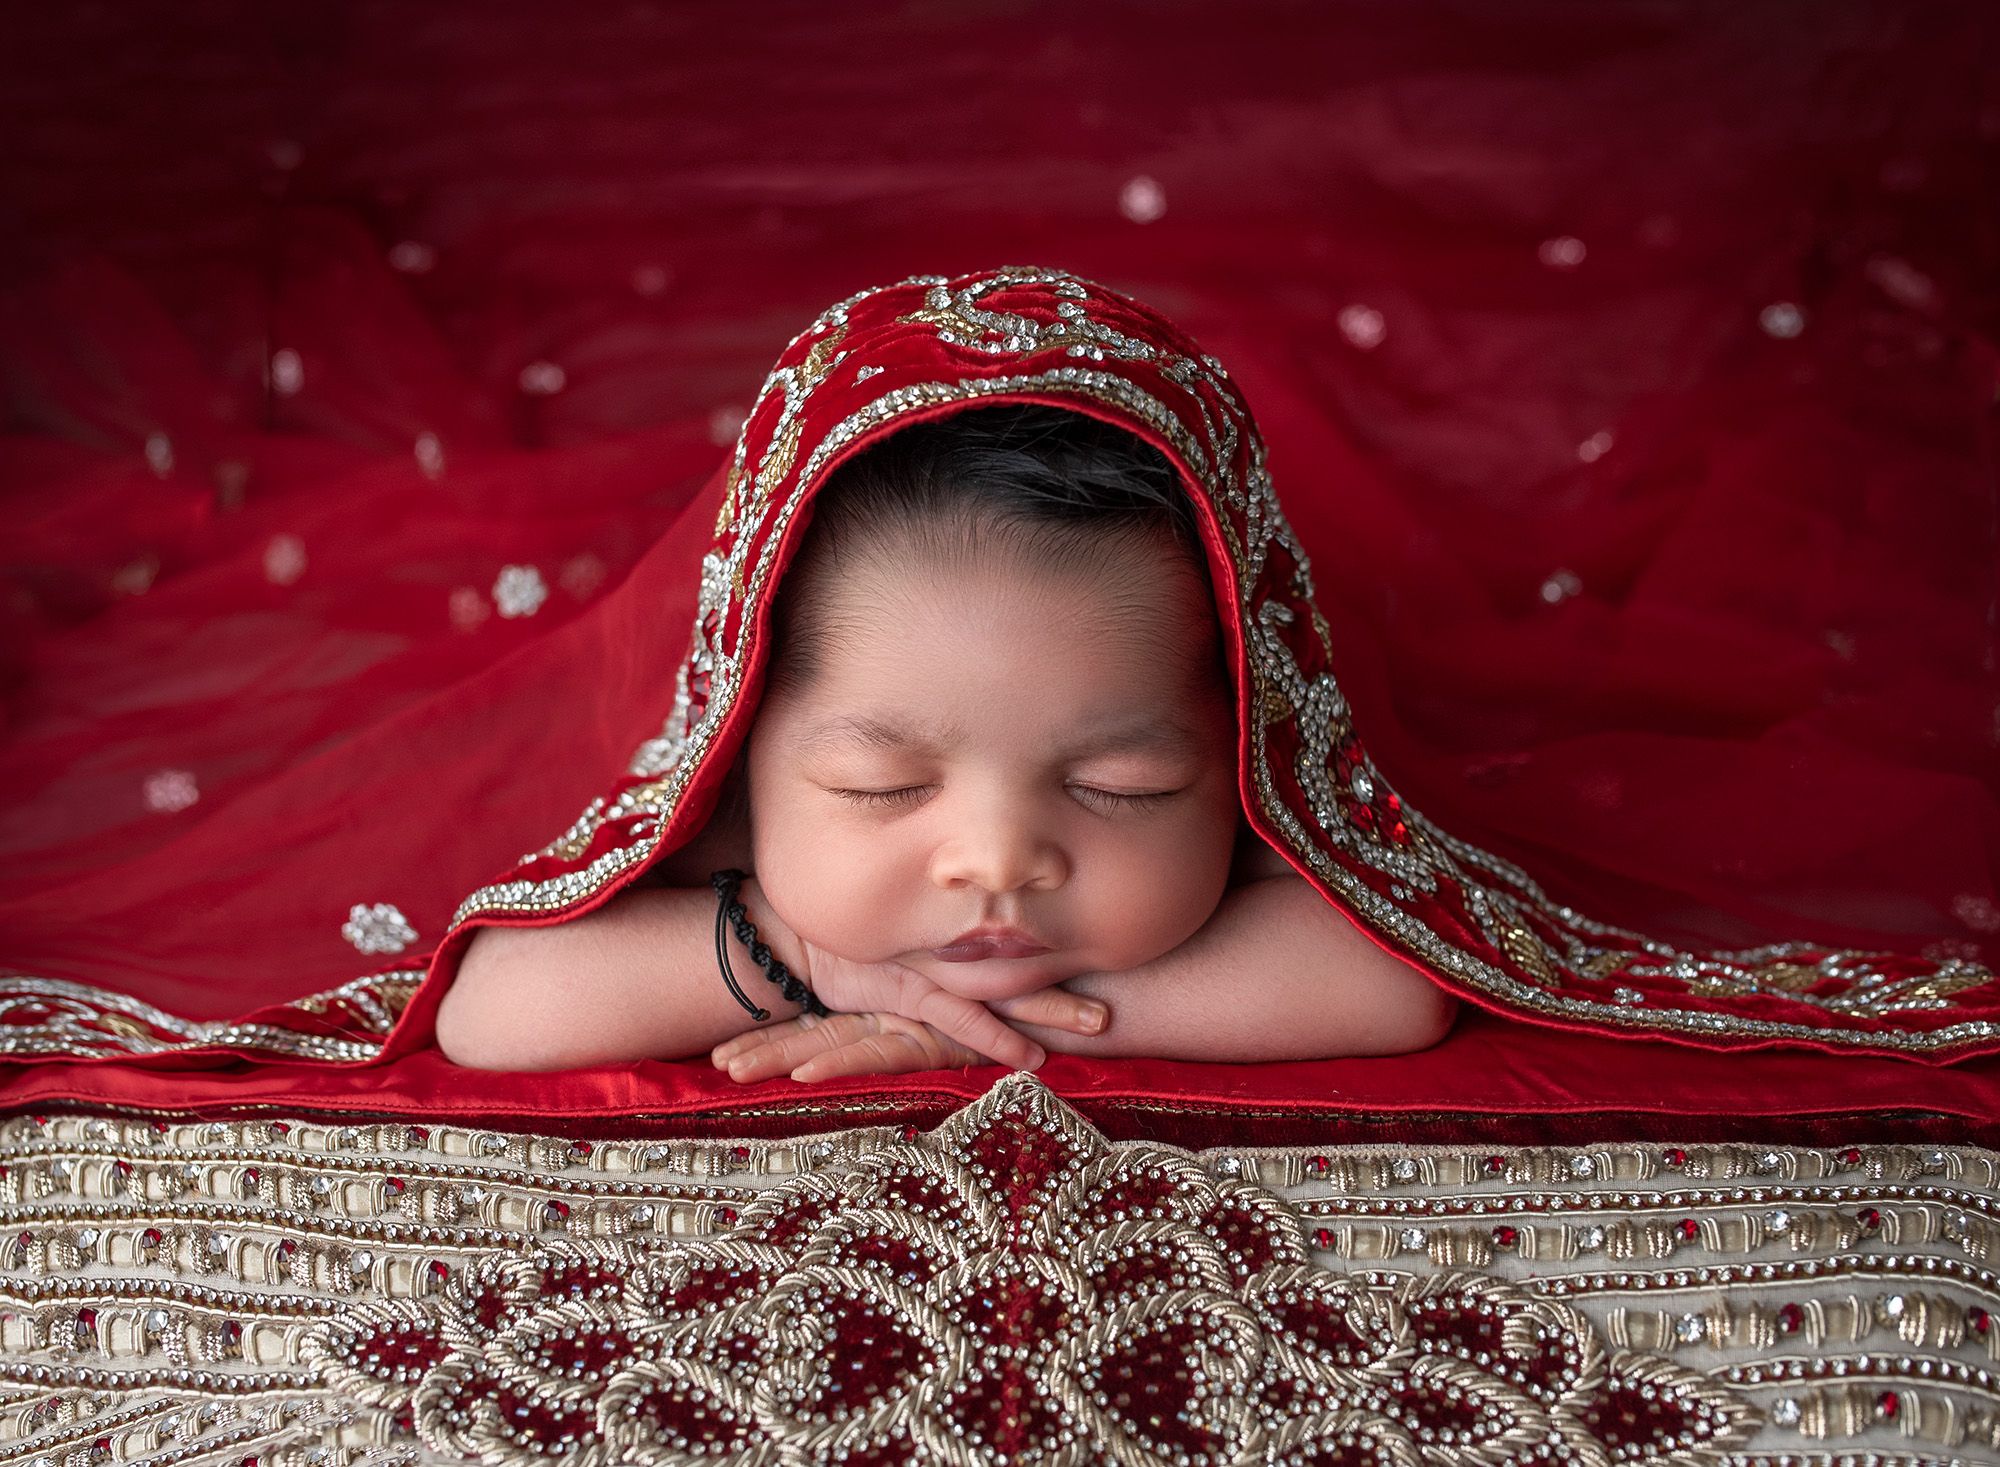 Newborn Photos full of color newborn baby girl asleep draped in red traditional costume